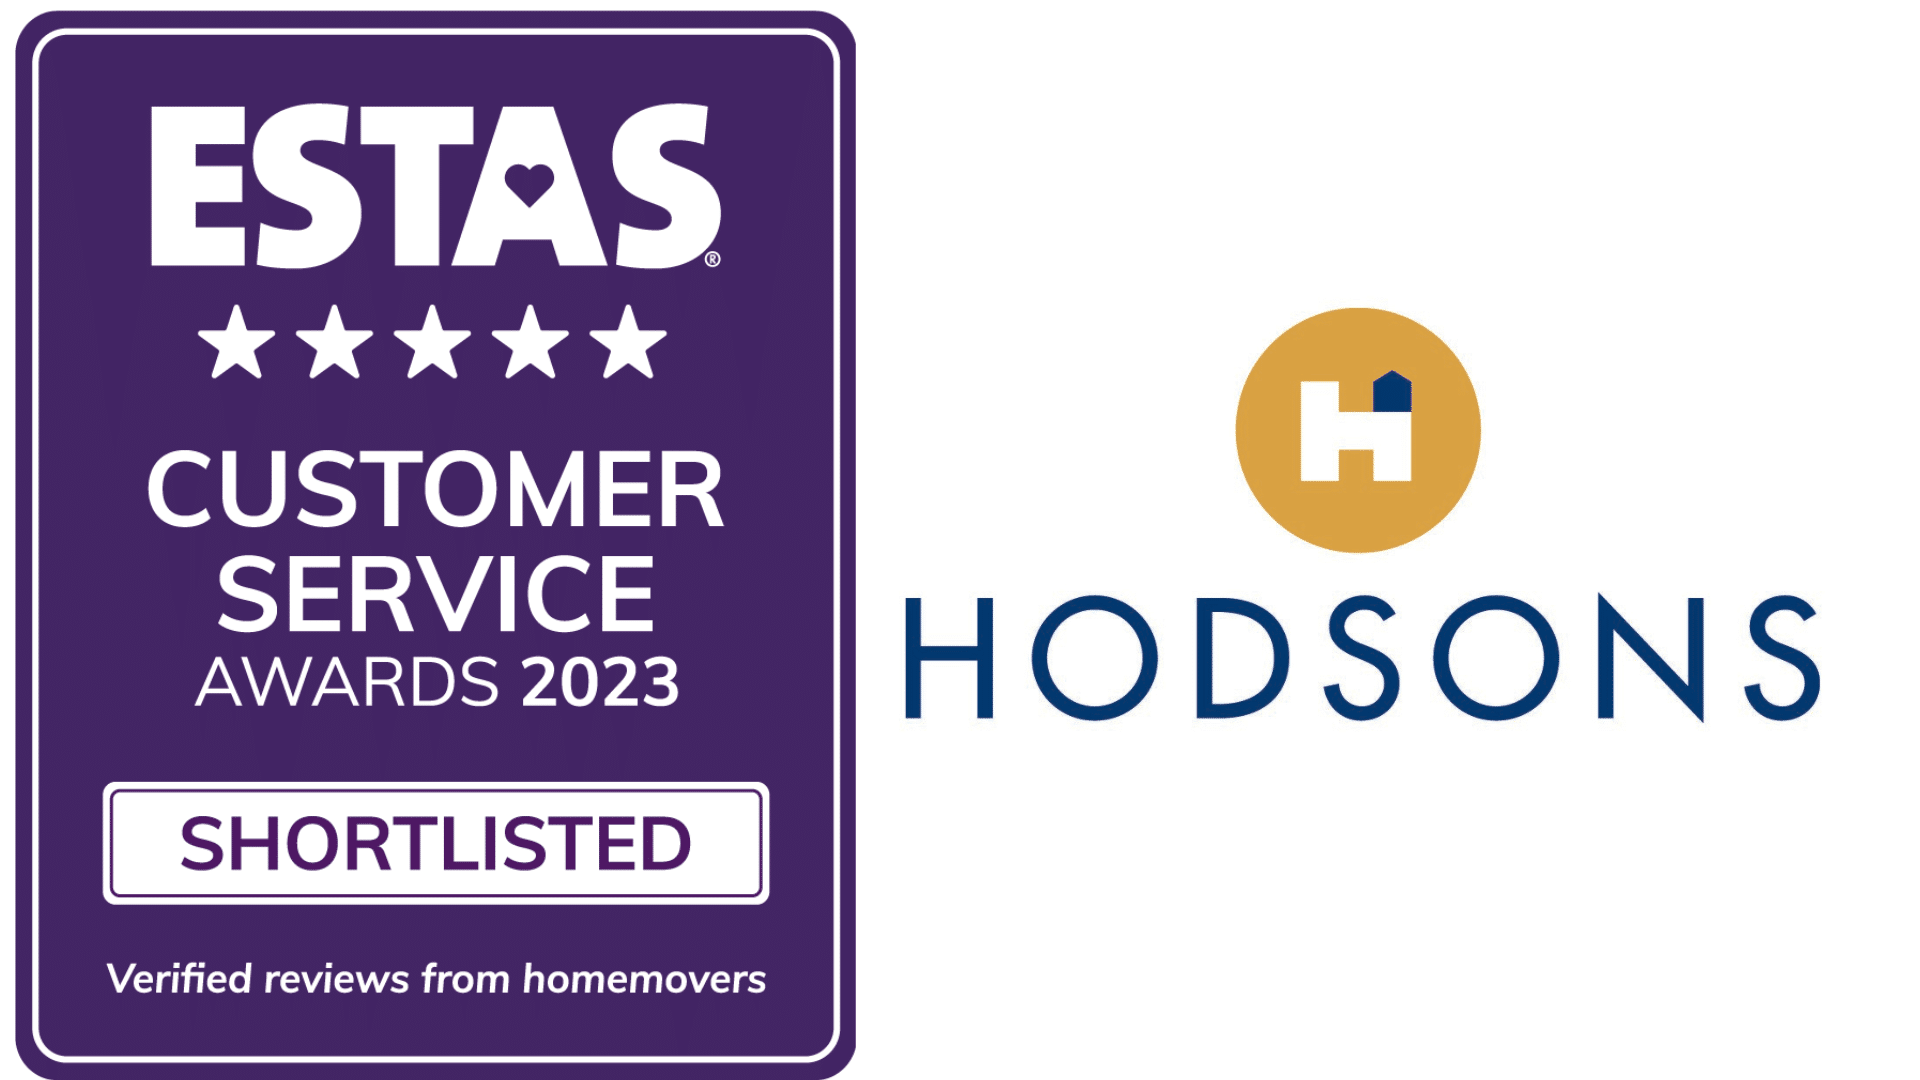 Hodsons achieves ‘Standard of Excellence’ to make The ESTAS shortlist for 2023